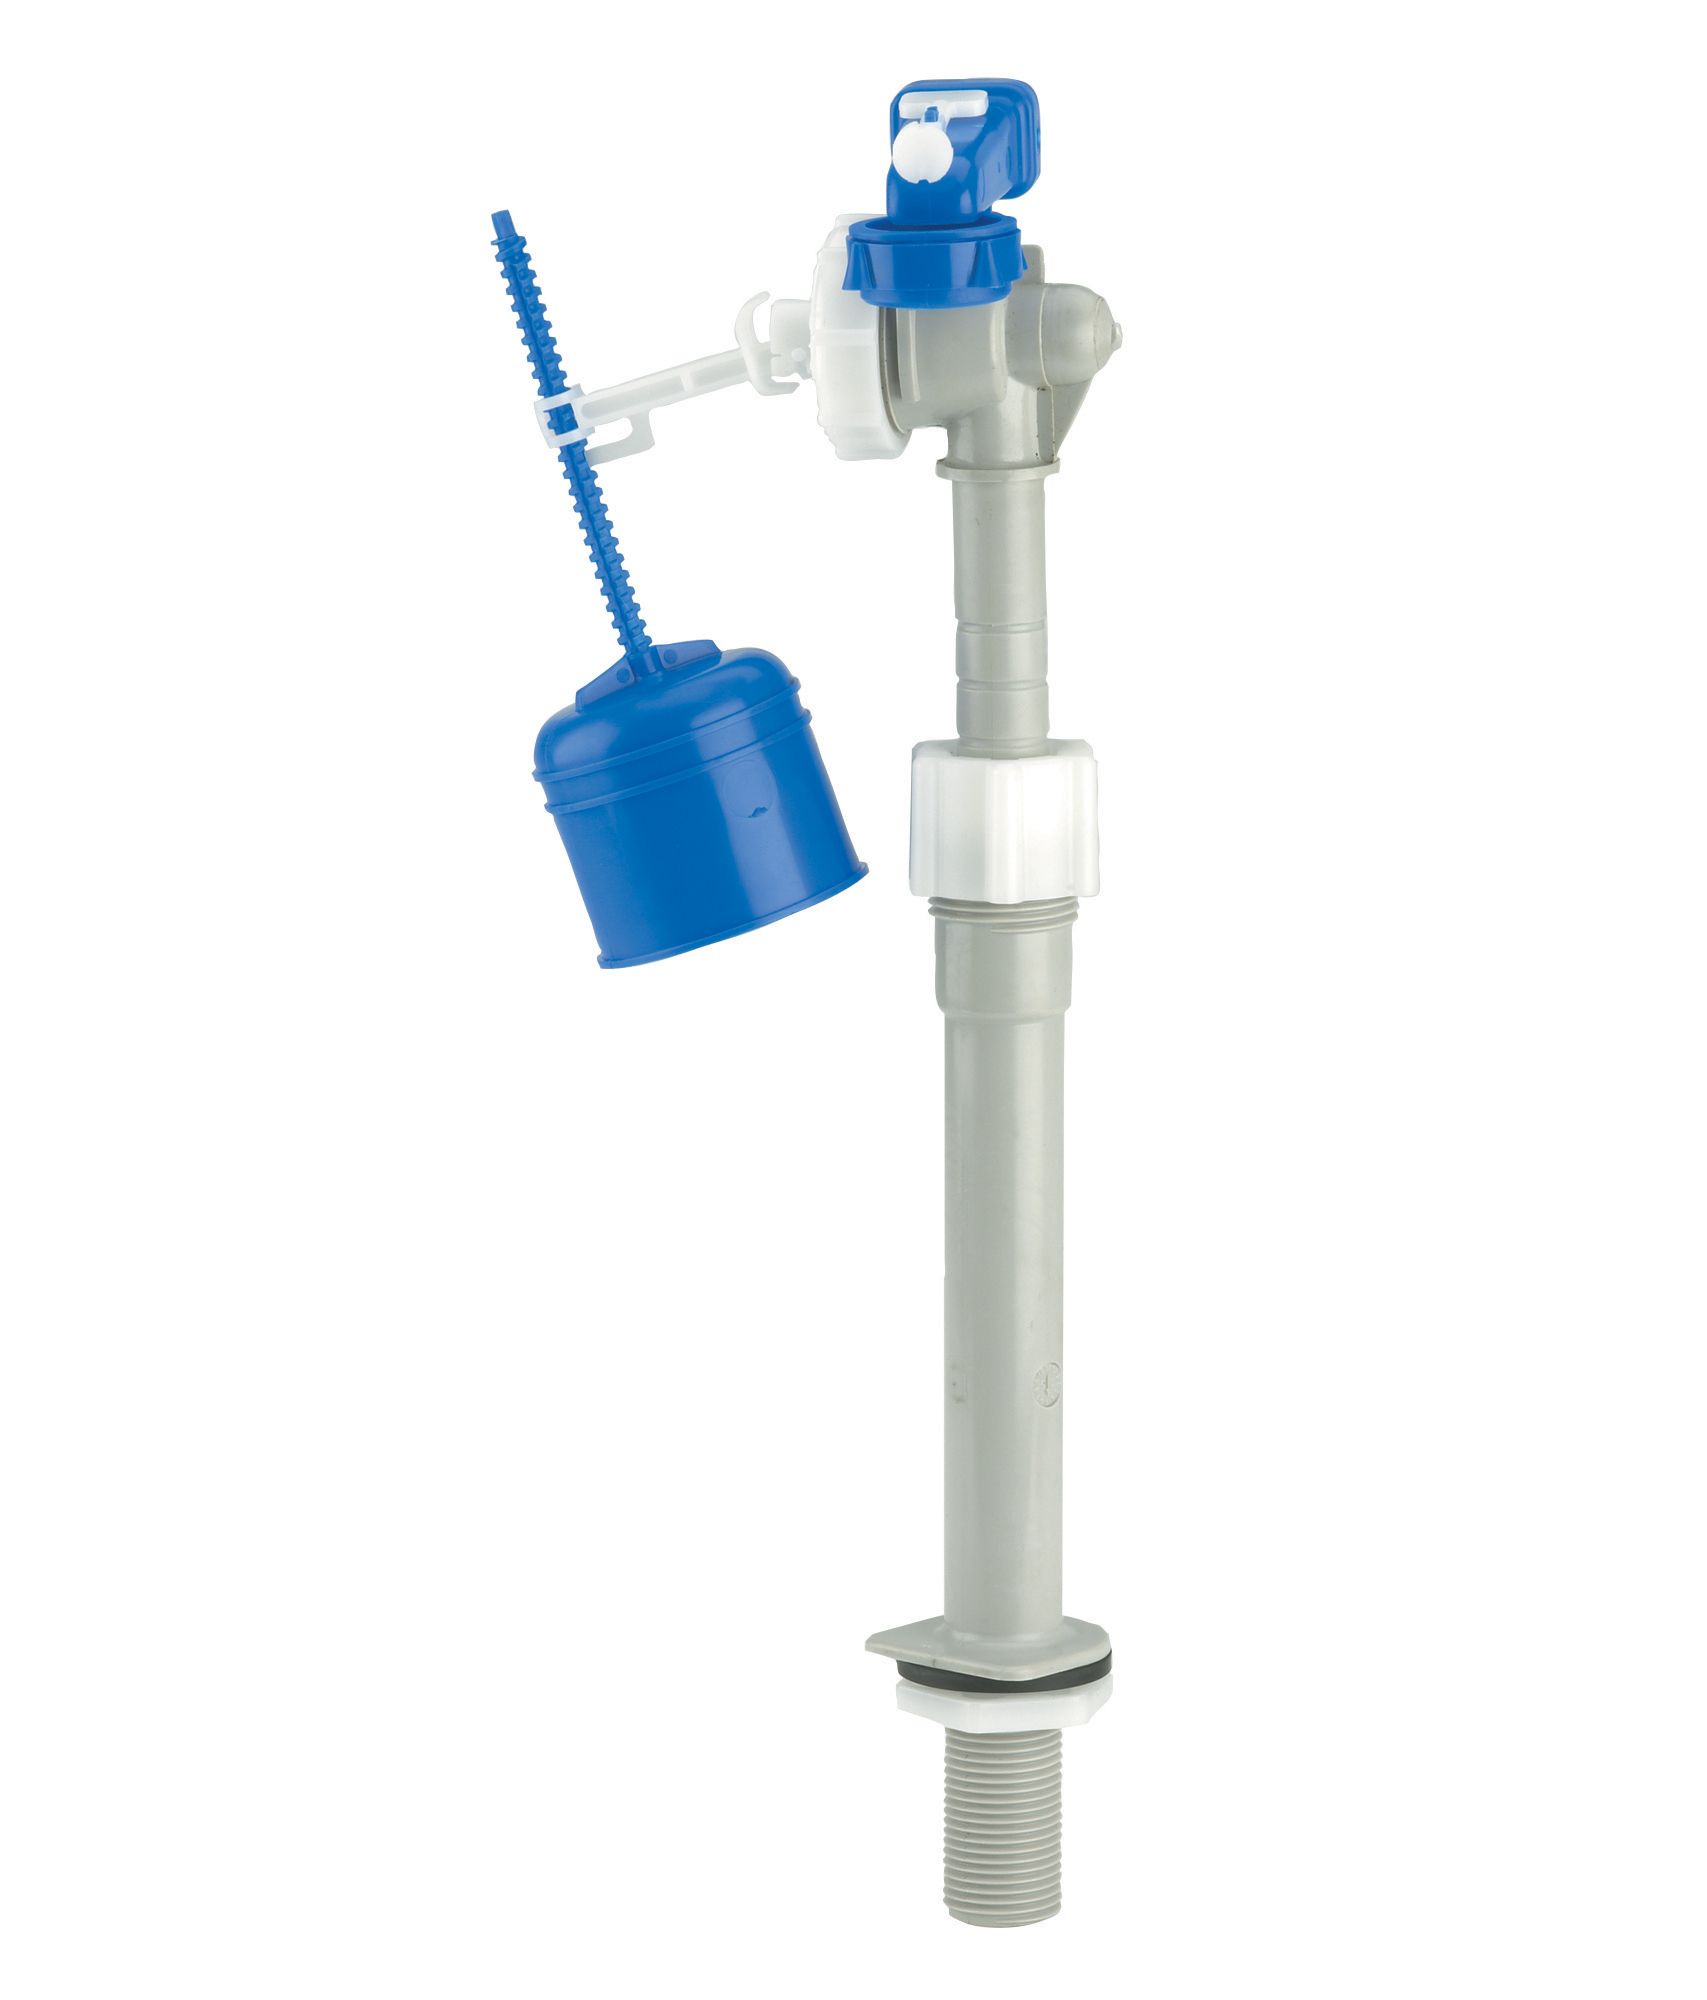 Dudley Adjustable Inlet Valve with Standard Tail